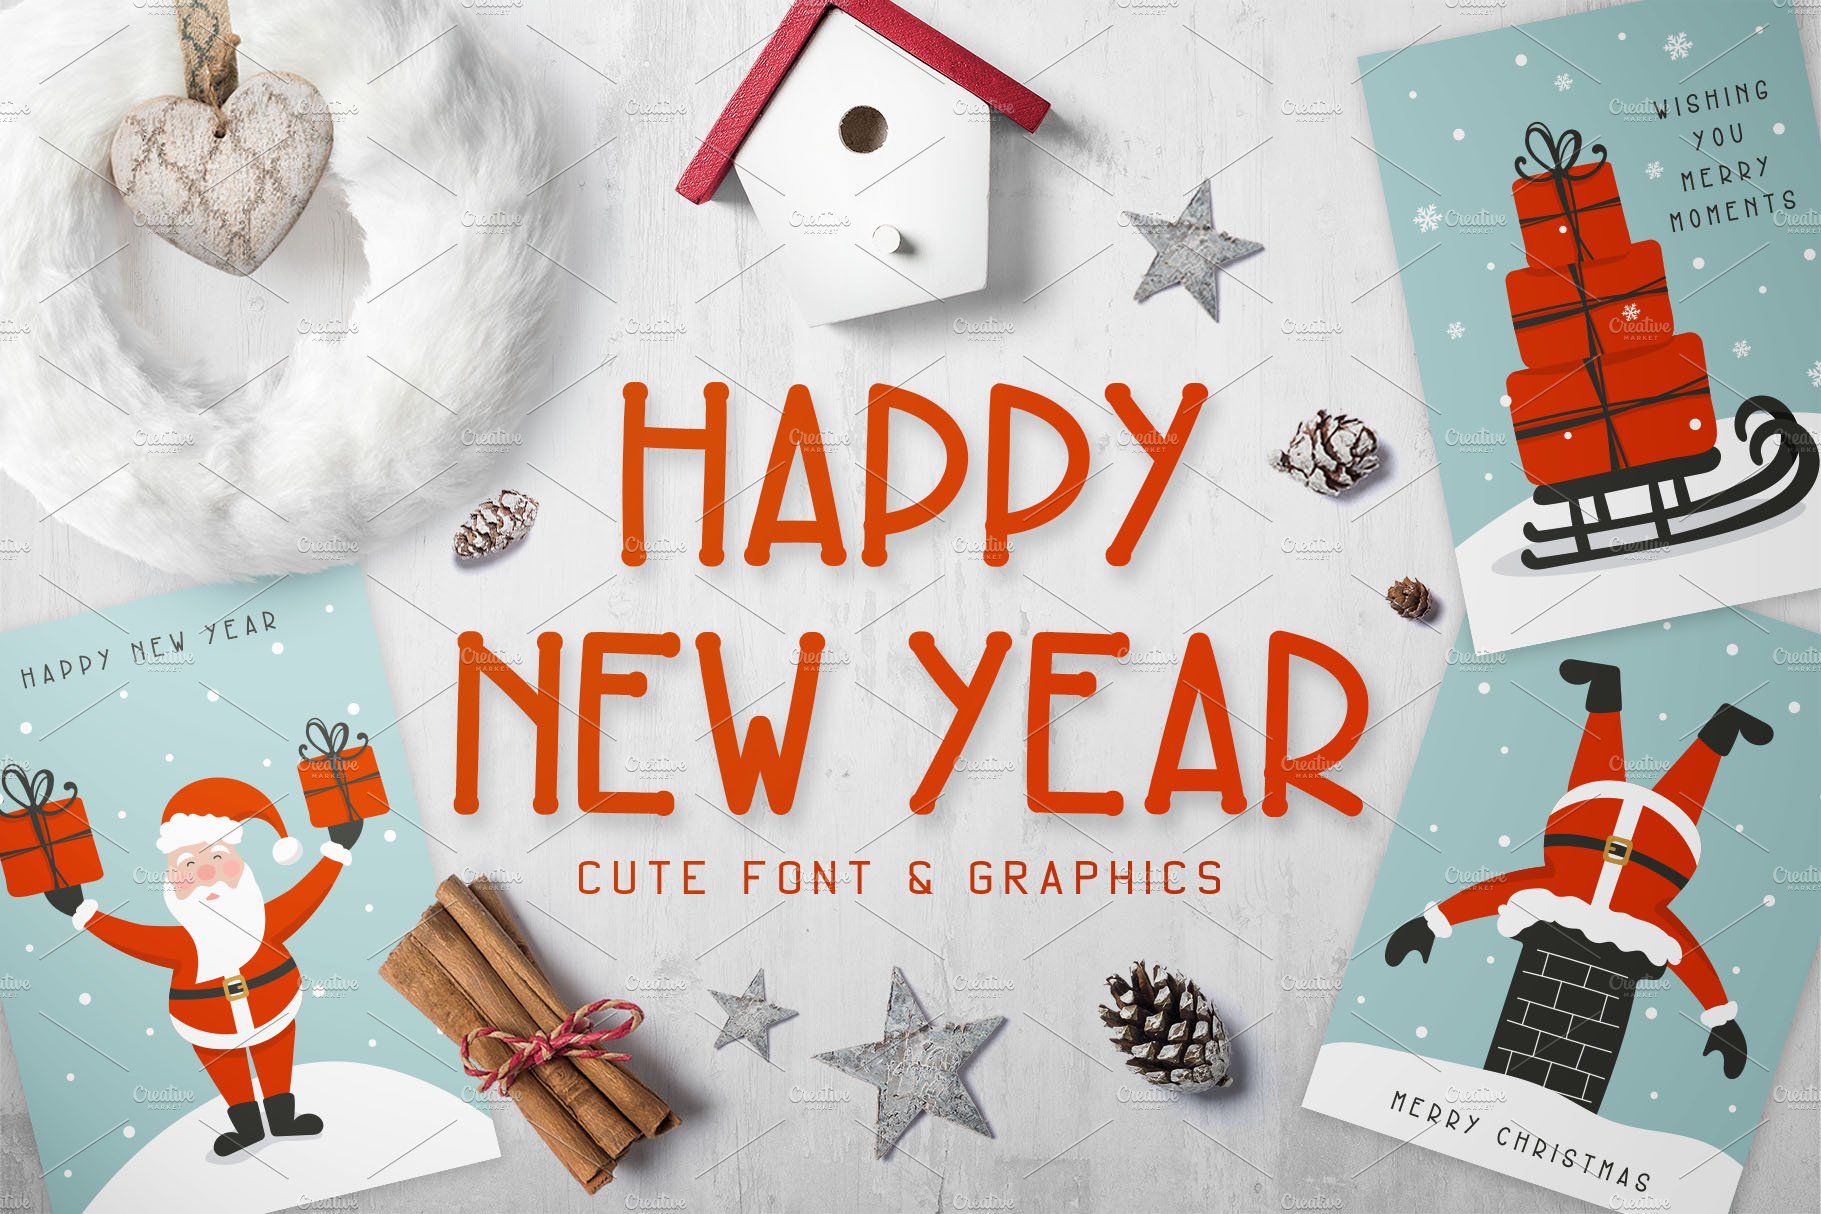 New Year Font and Graphics Pack cover image.